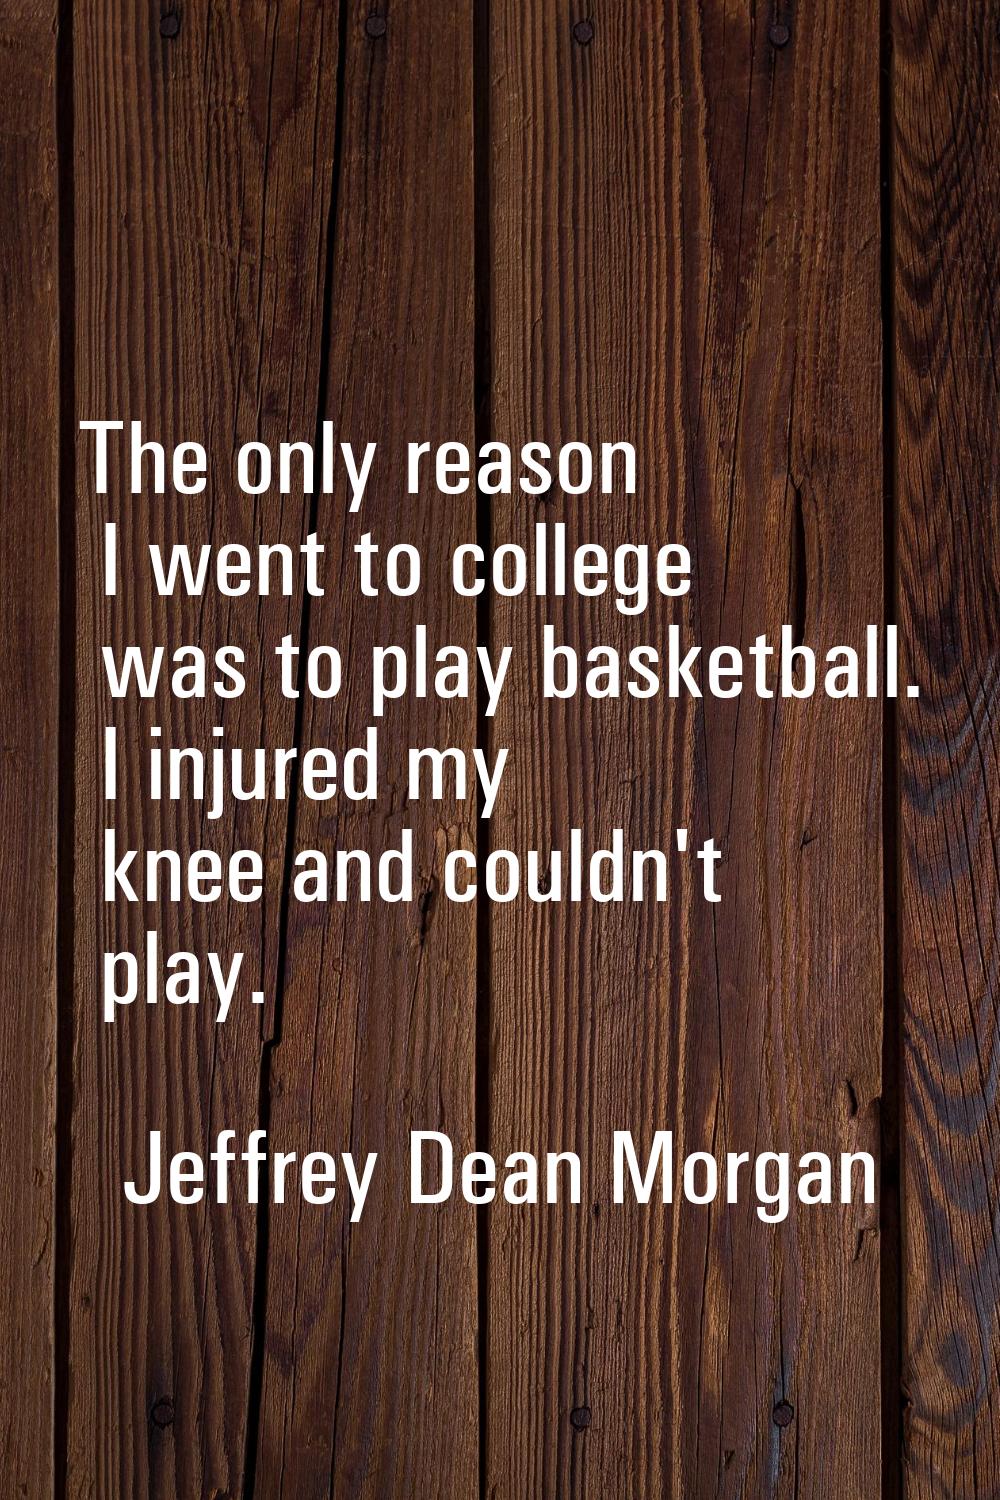 The only reason I went to college was to play basketball. I injured my knee and couldn't play.